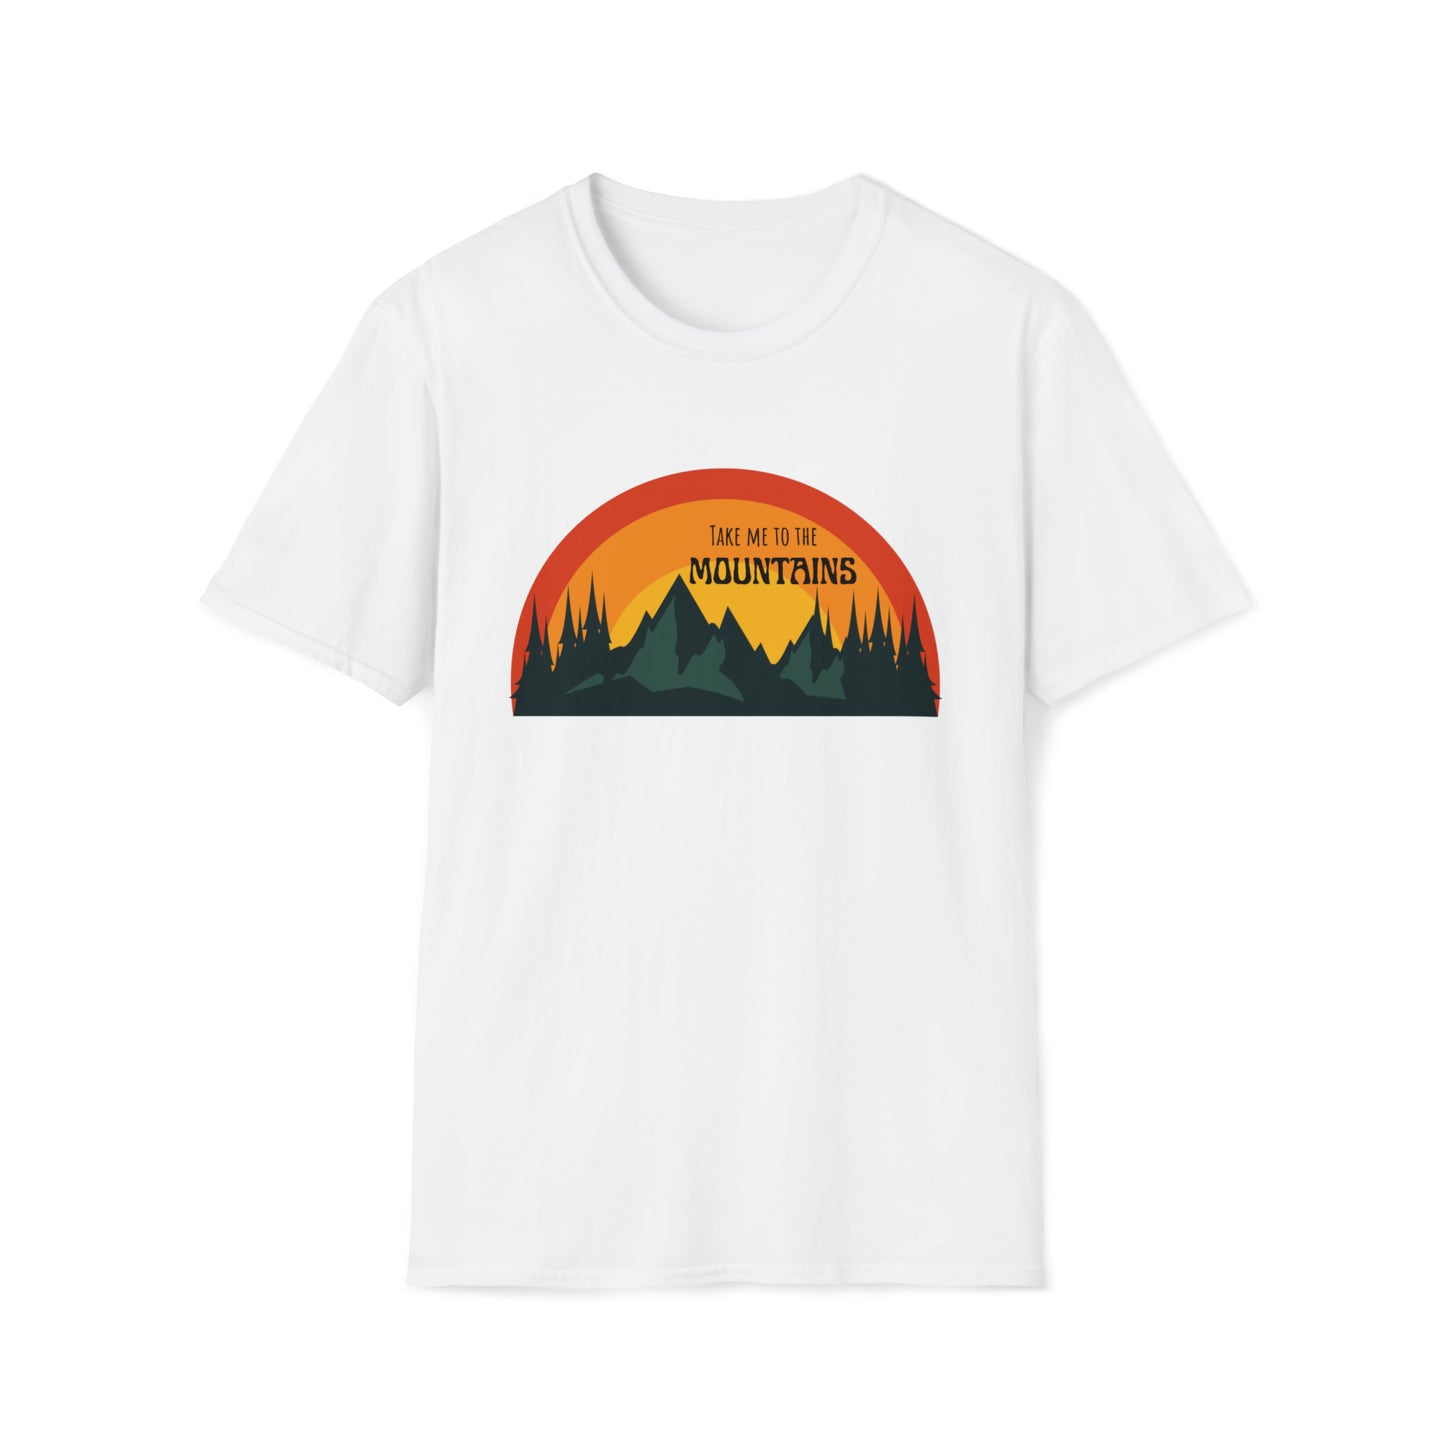 Unisex Softstyle T-Shirt, Take Me To The Mountains